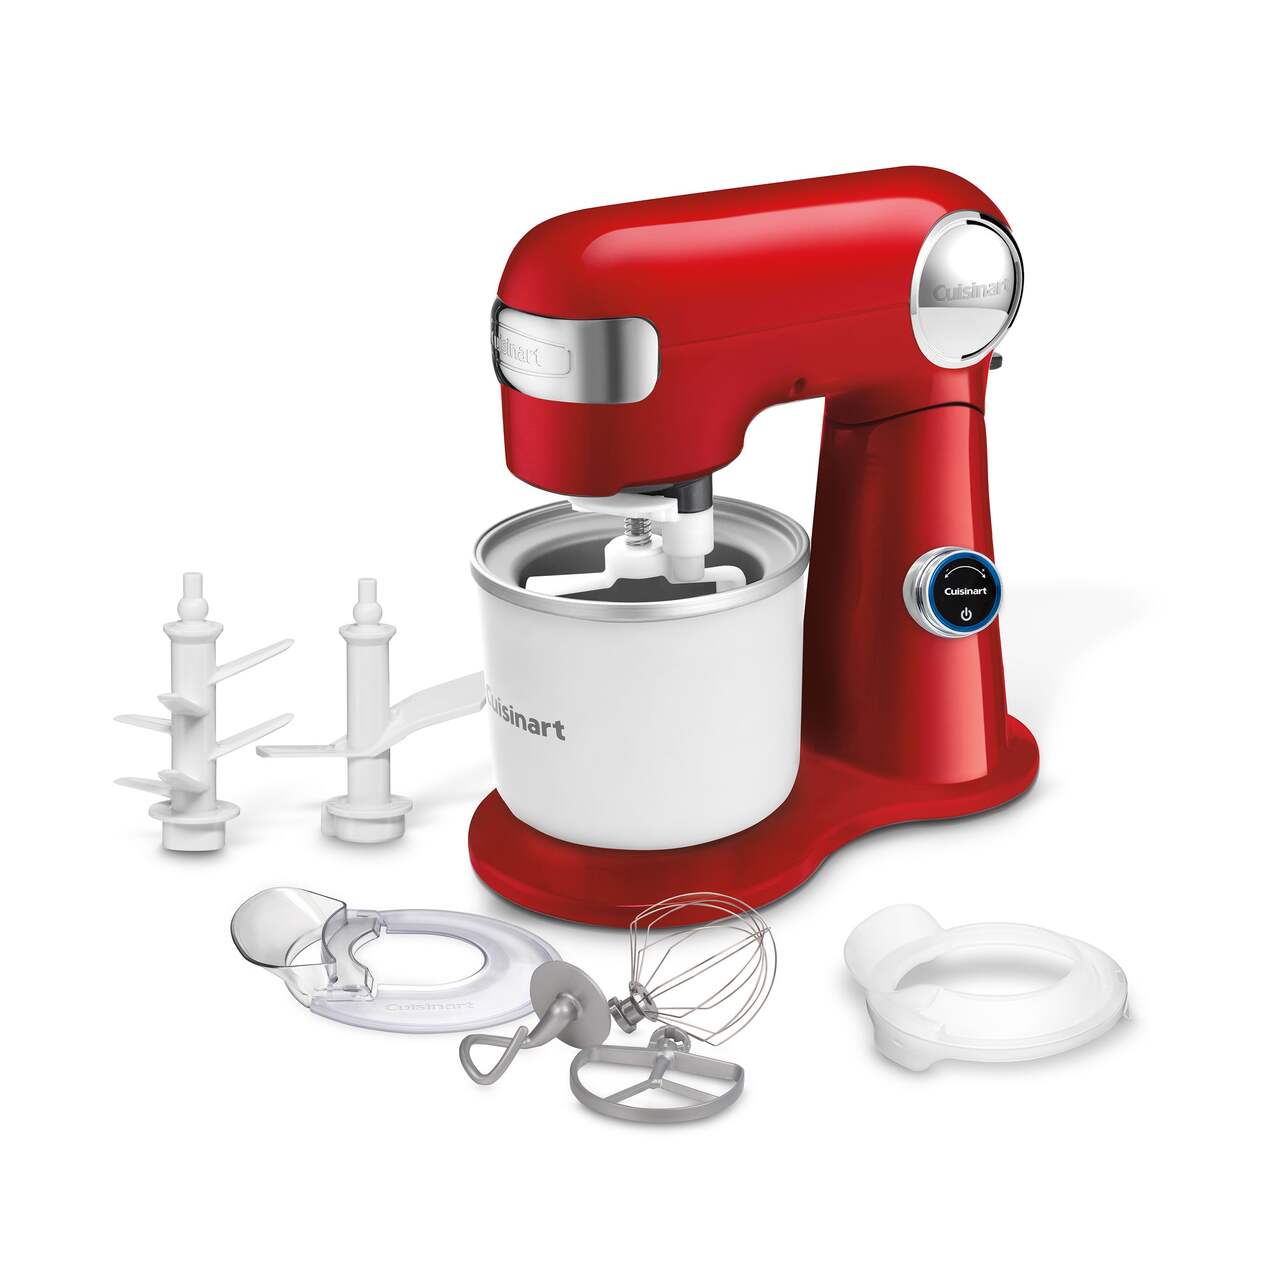 Cuisinart Sm-50r 5.5-Quart Stand Mixer Ruby Red Bundle with 1 Year Extended Protection Plan